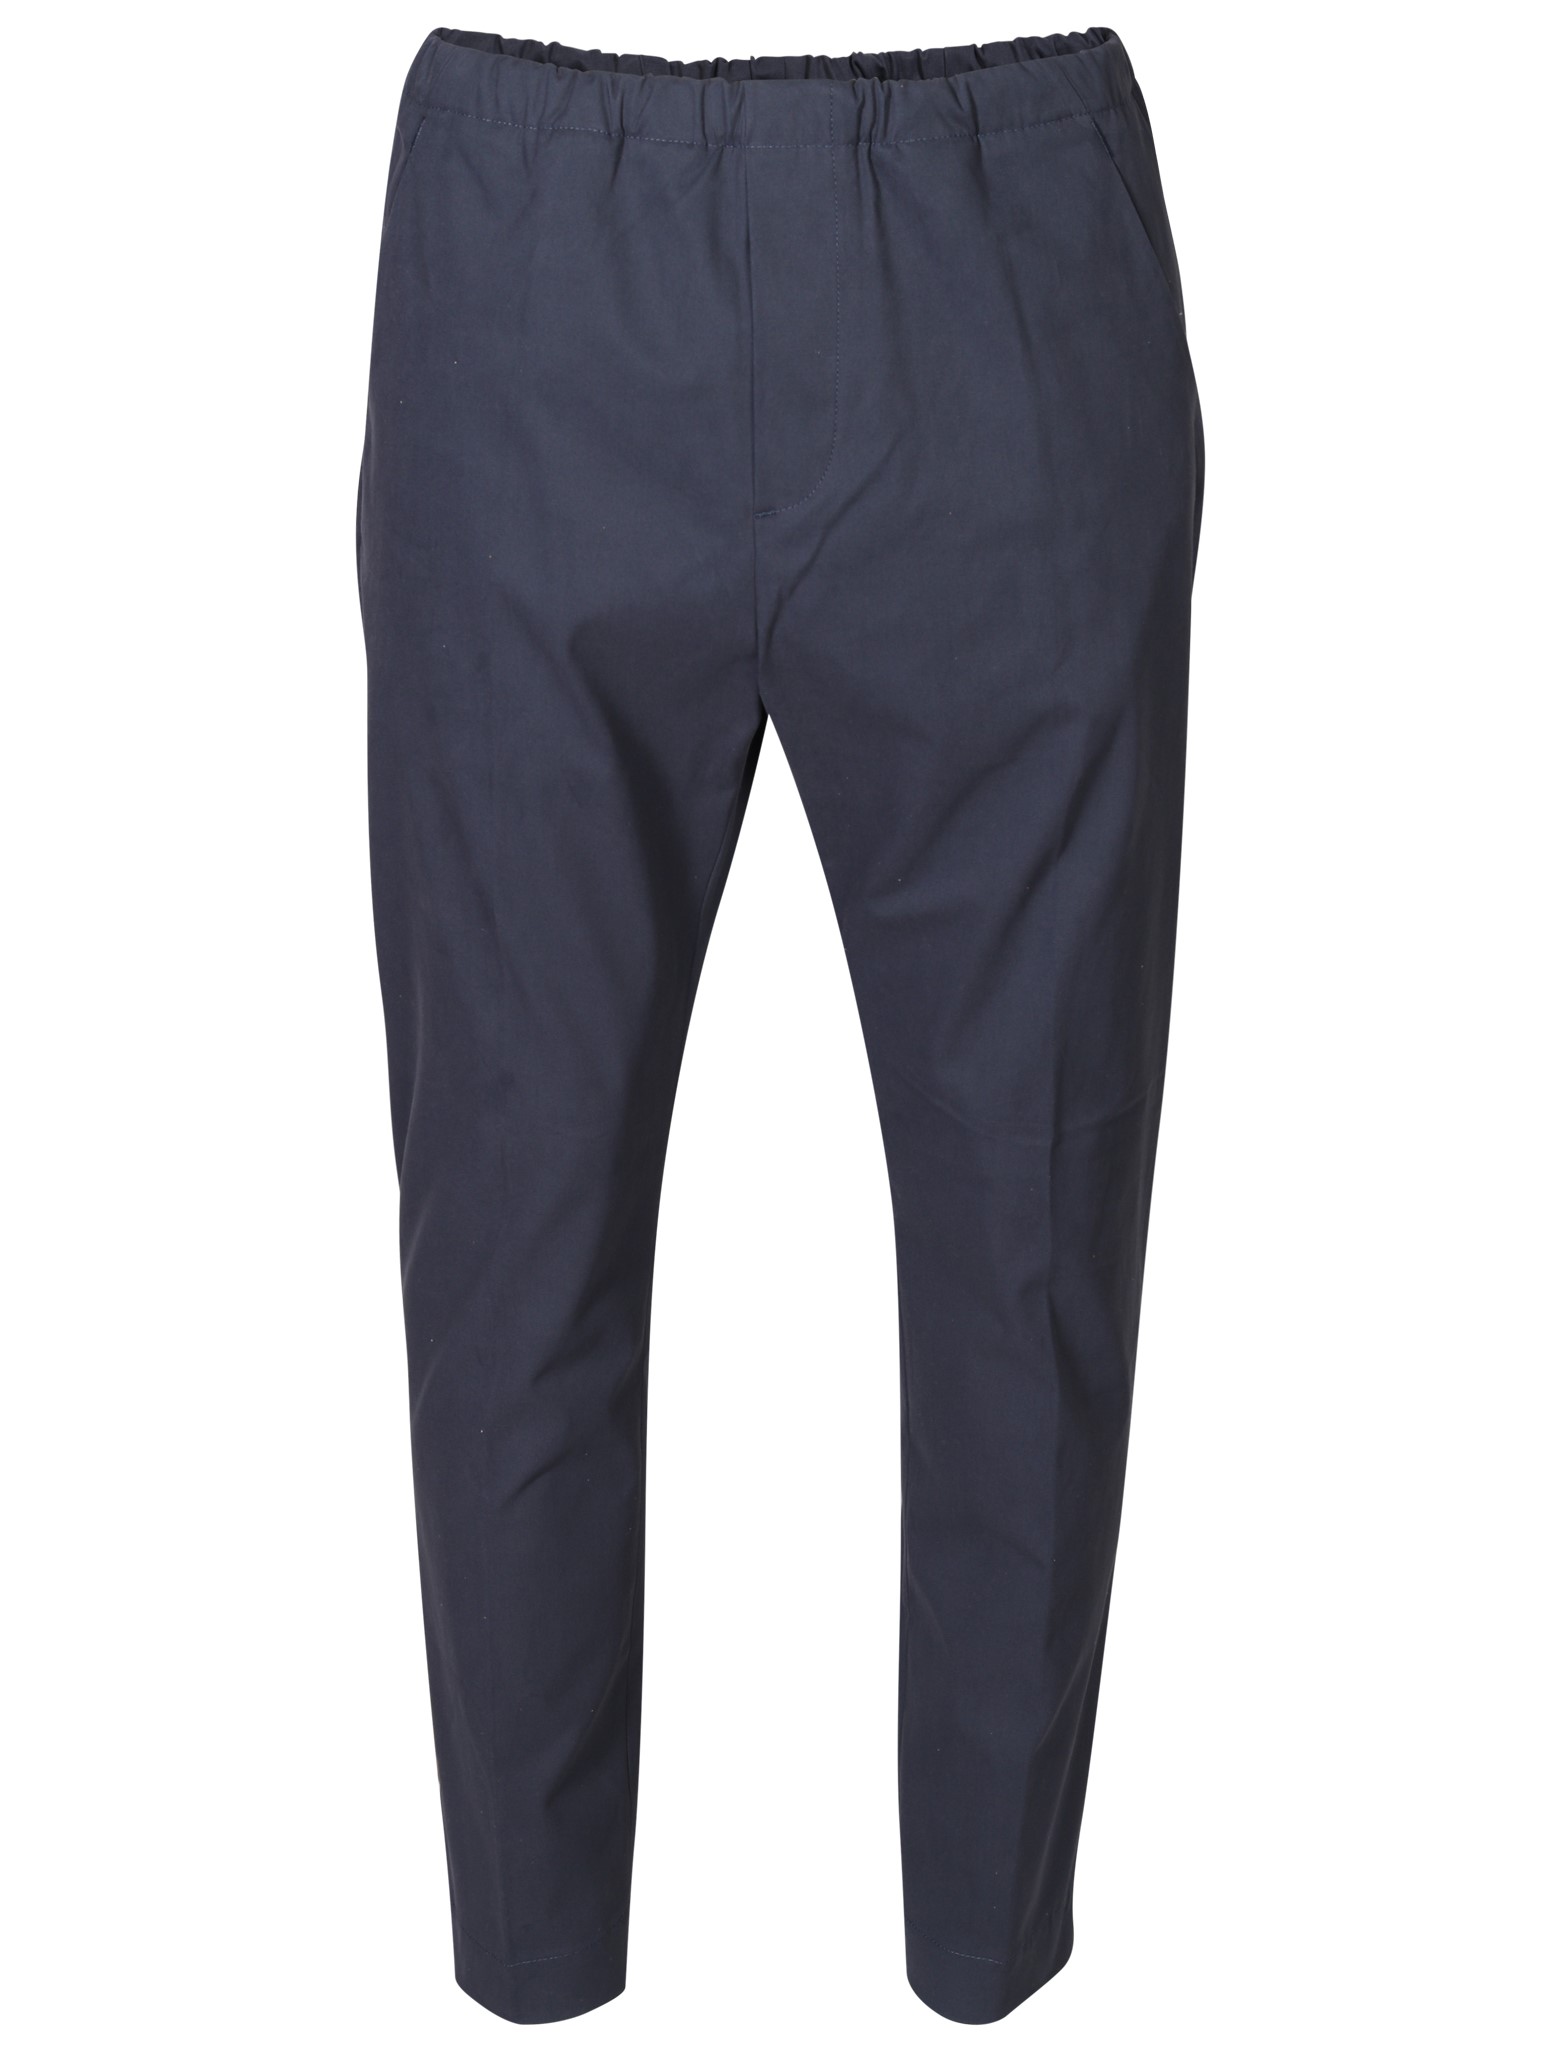 NINE:INTHE:MORNING Mirco Carrot Cotton Stretch Pant in Blue Navy 54